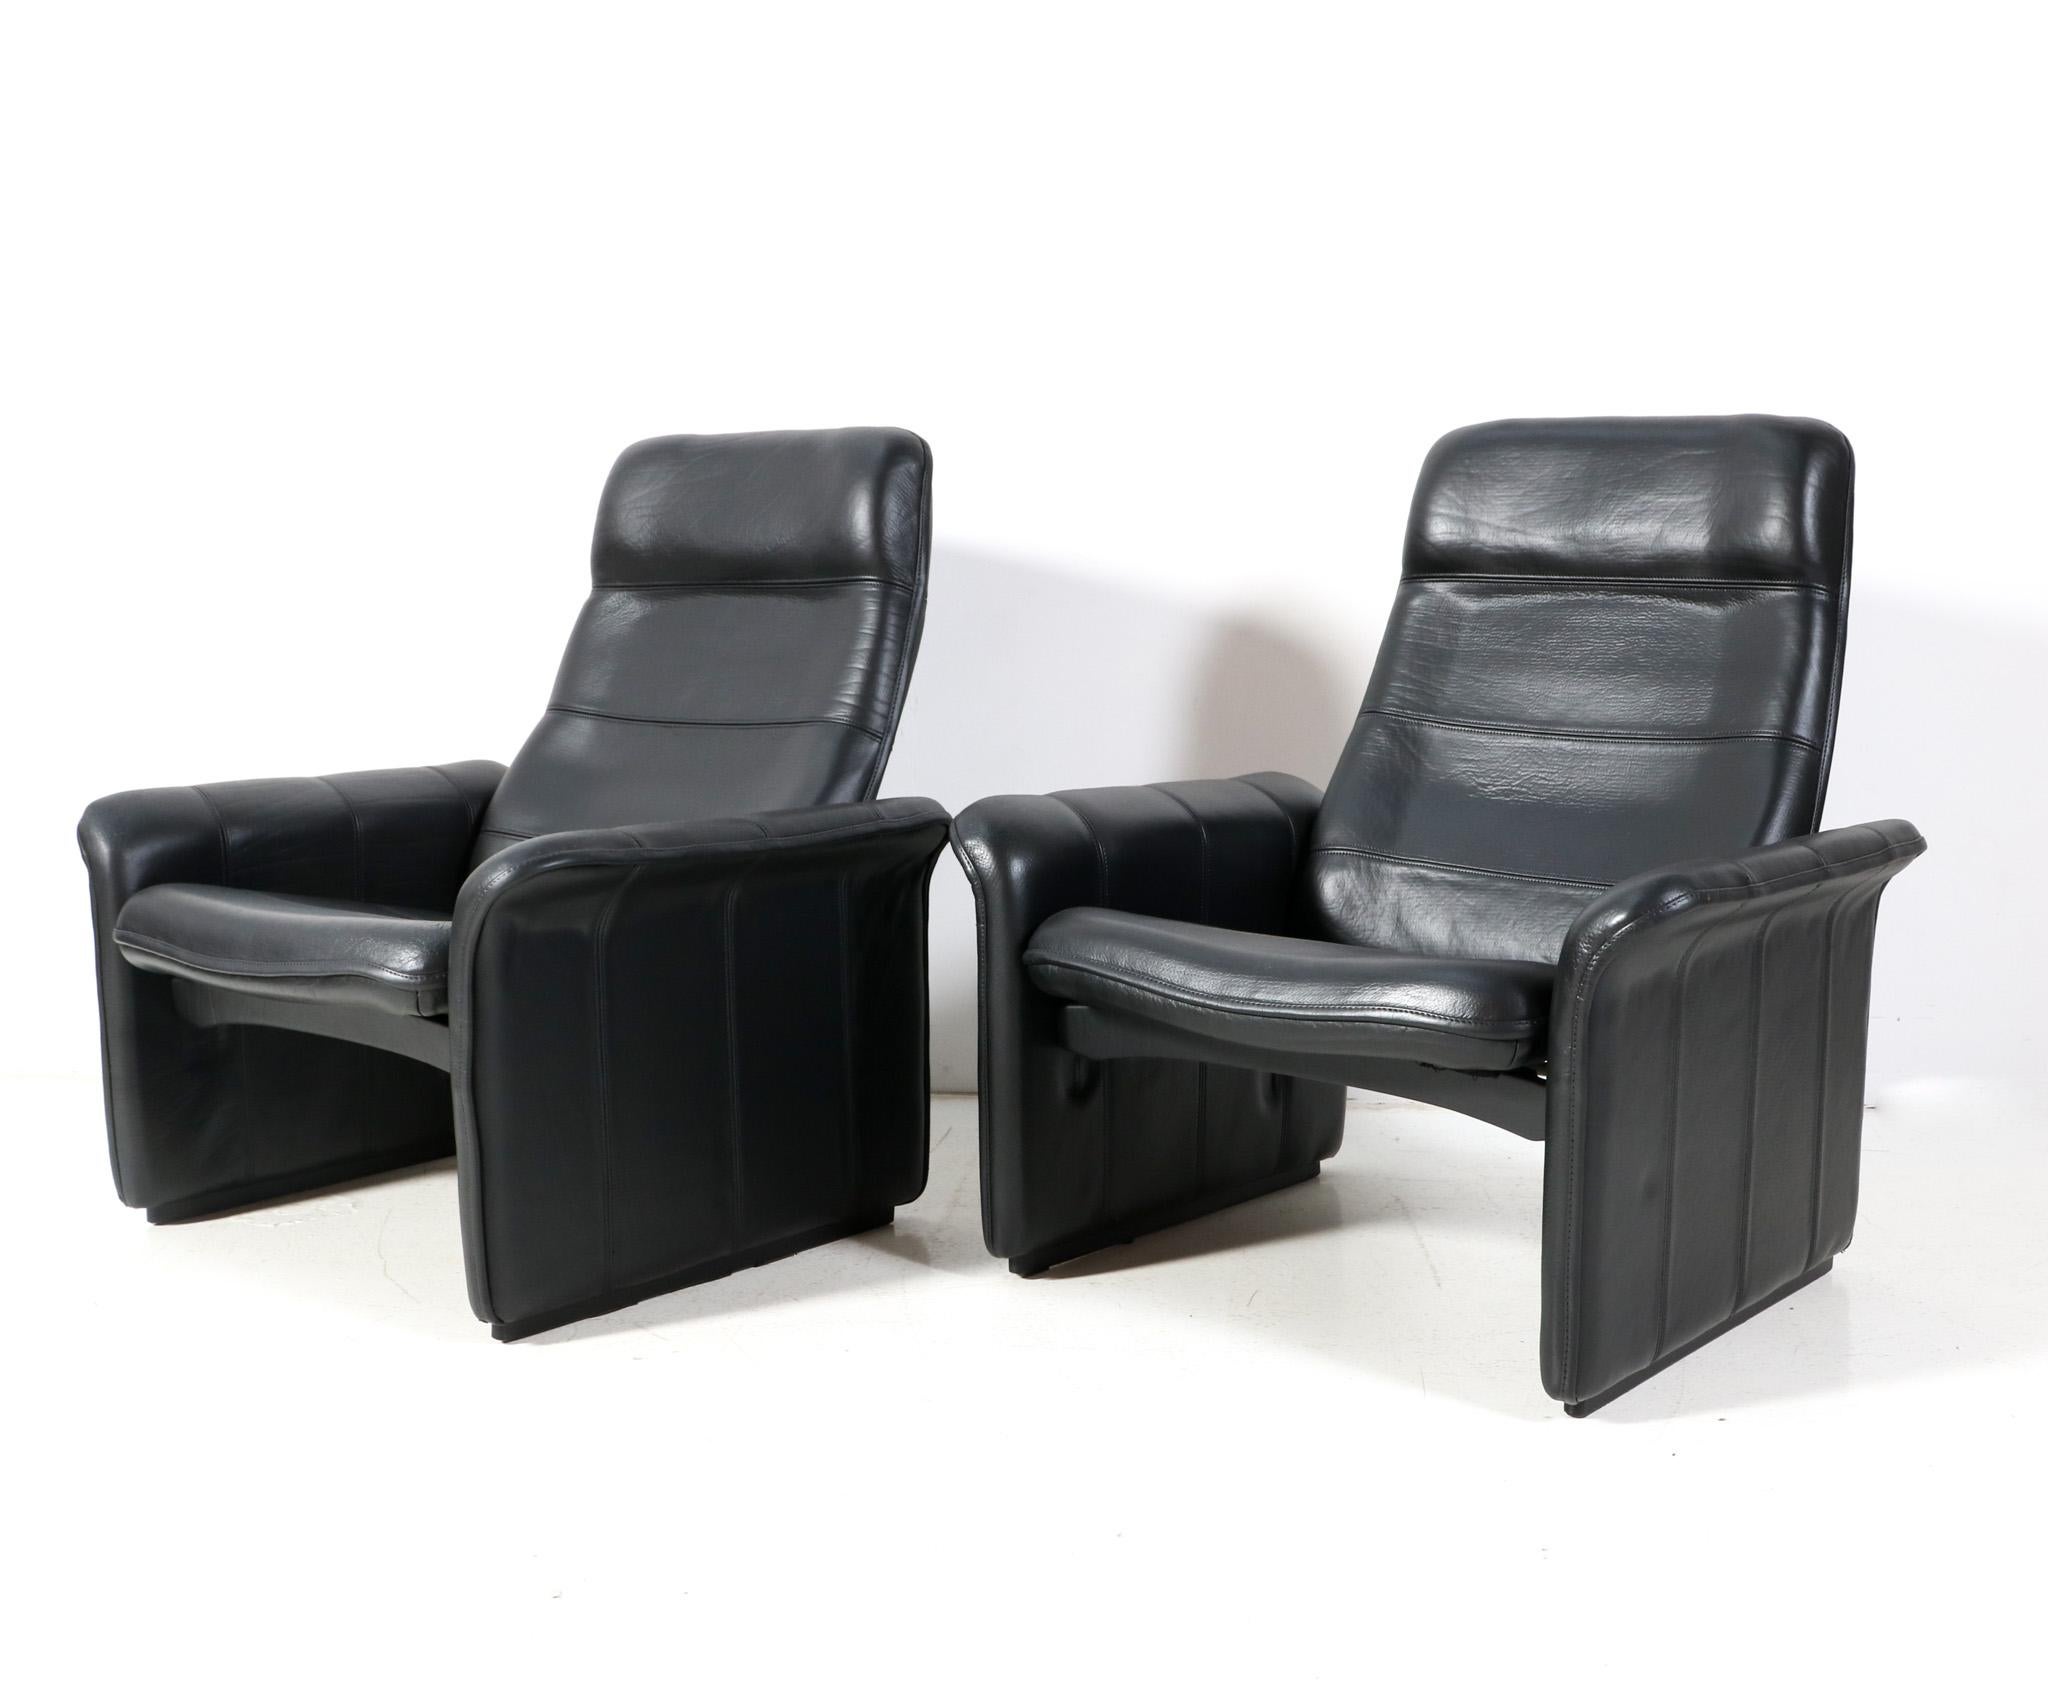 Pair of Buffalo Neck Leather DS-50 Lounge Chairs and Ottoman by De Sede, 1970s In Good Condition For Sale In Amsterdam, NL